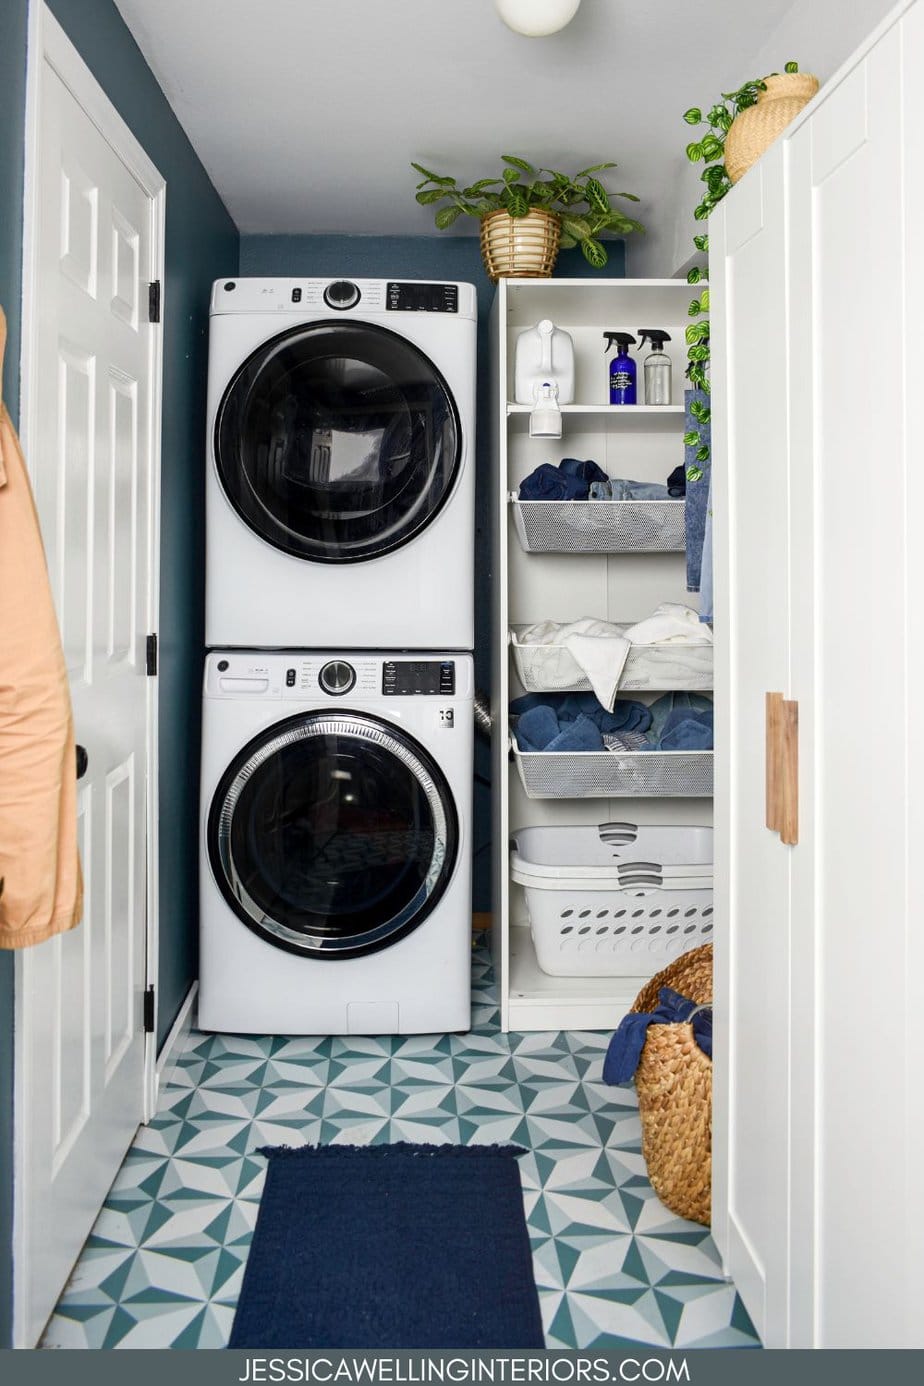 A Small Laundry Room Goes Vertical - Jessica Welling Interiors